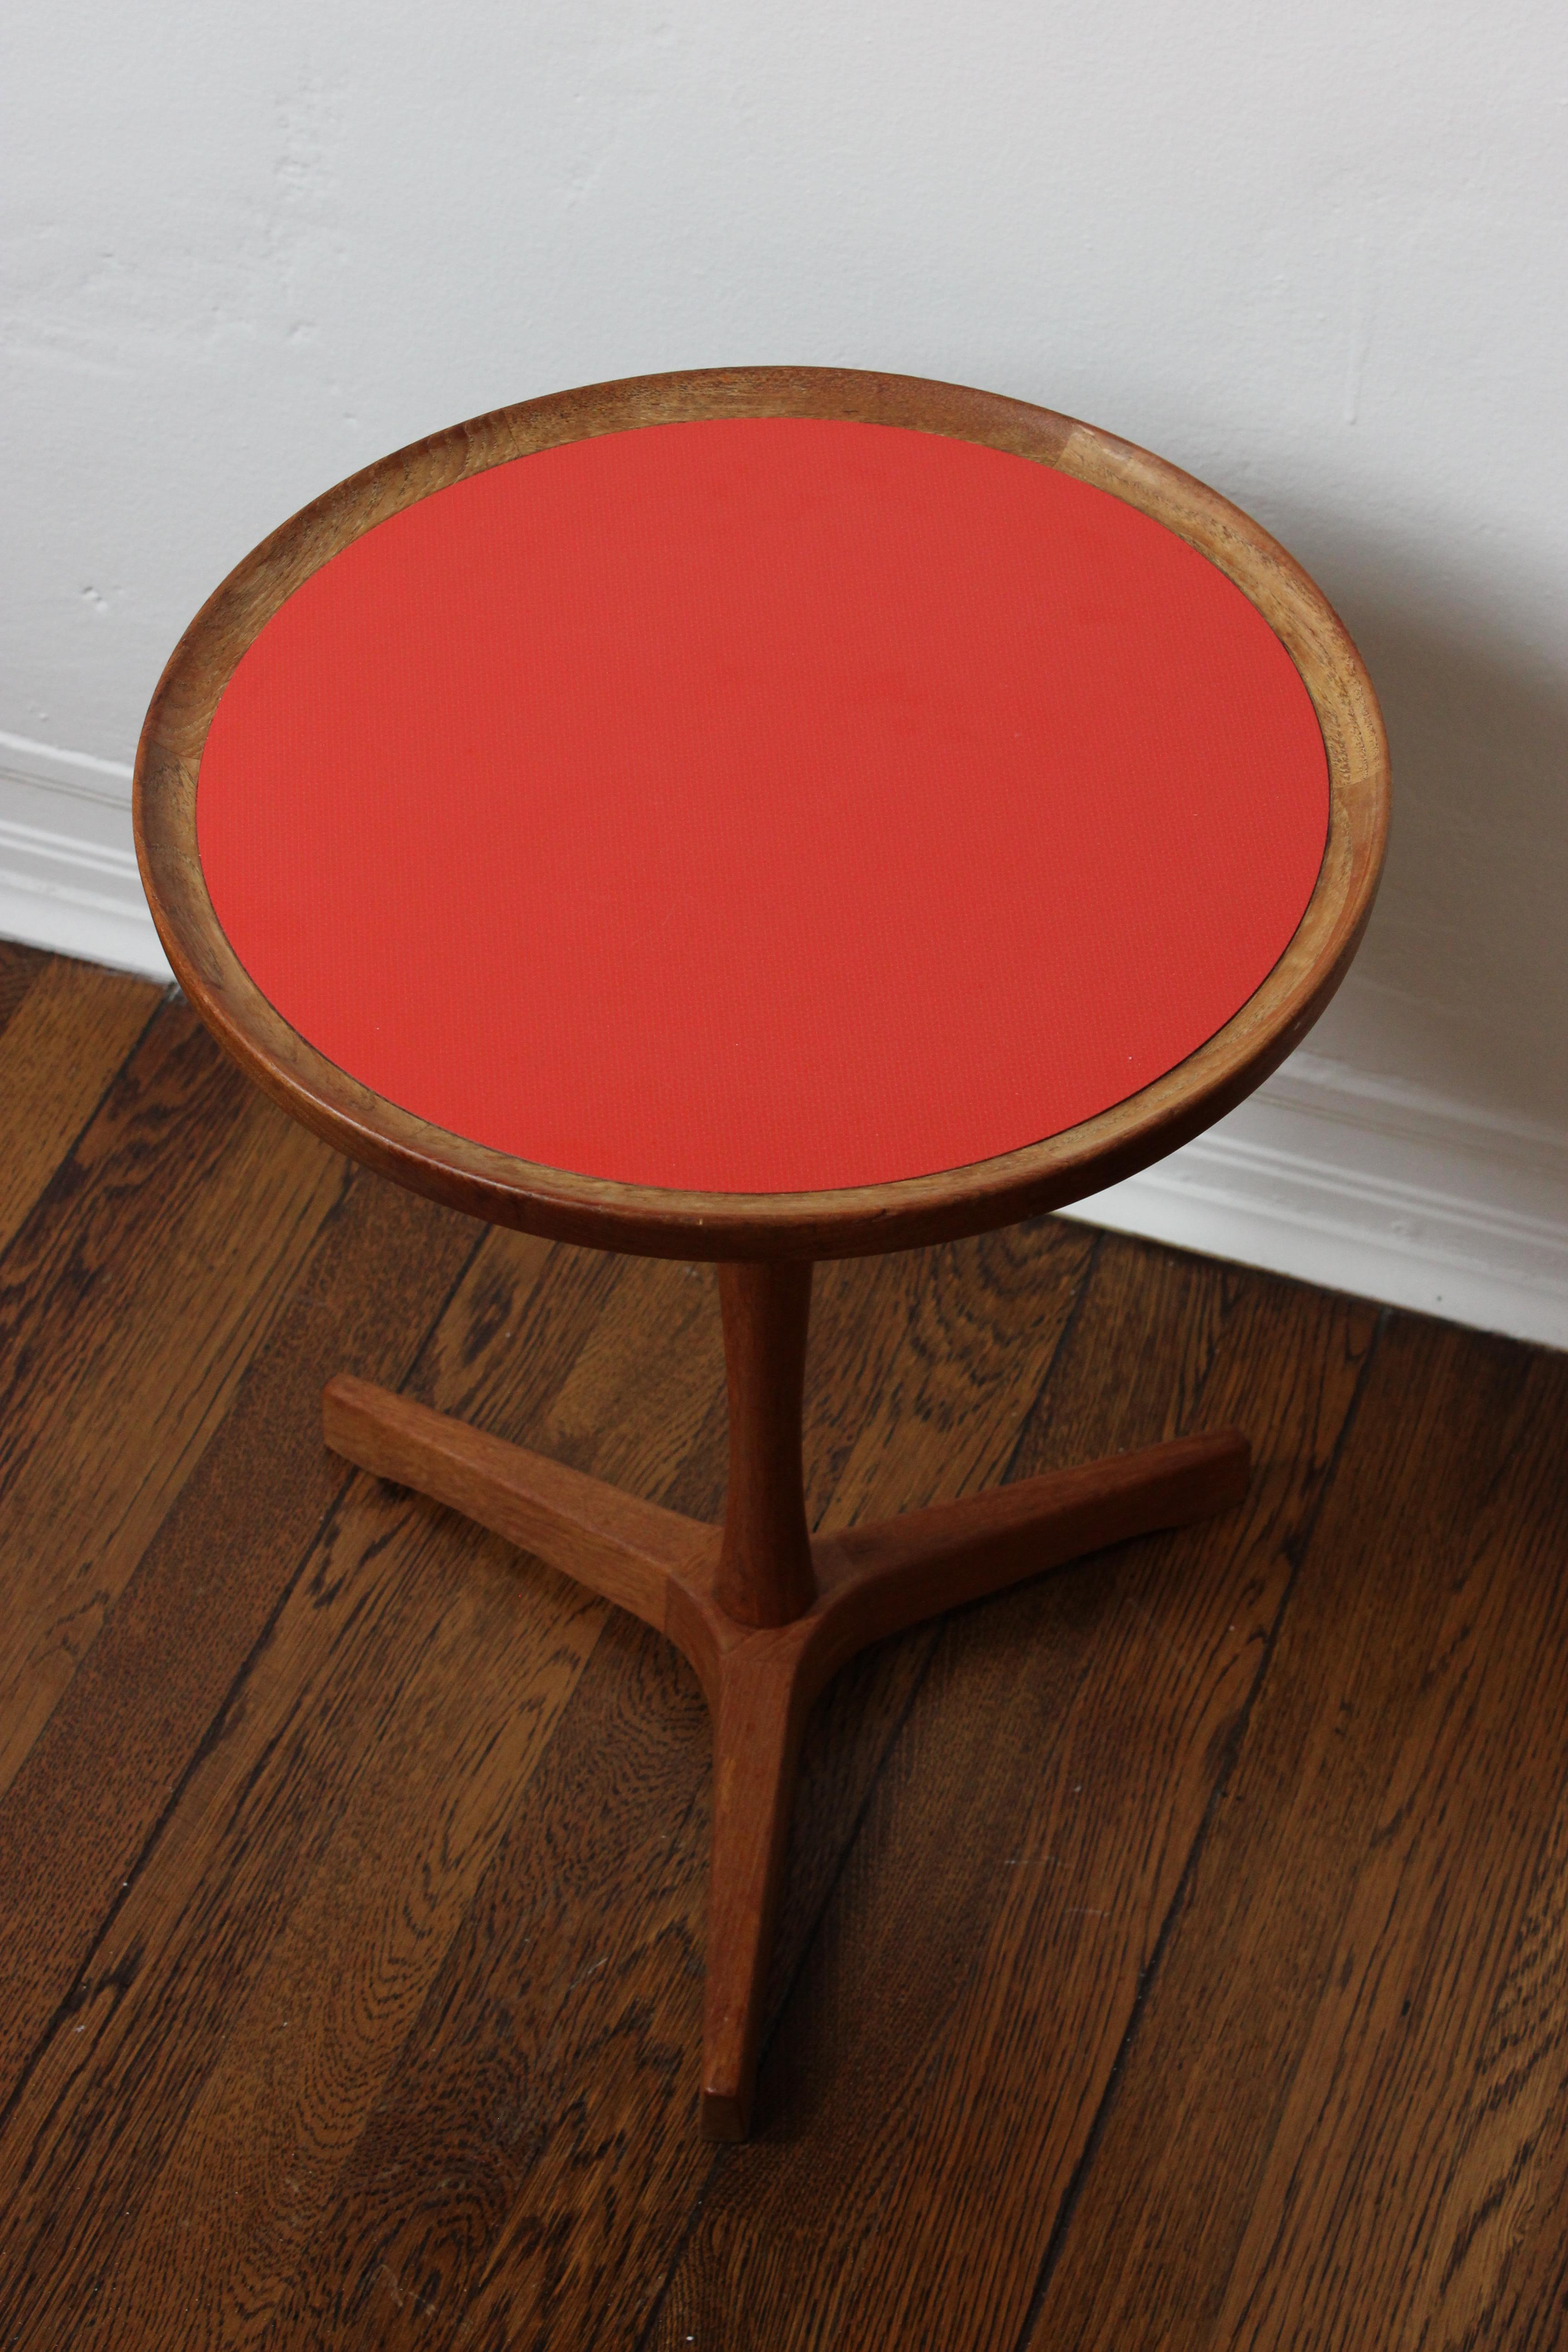 A very rare occasional side table by Hans C. Andersen for Artex. The orange formica top was not seen on many of these tables and remains the hardest version to find. 

Denmark, 1960's 
Teak.

2x Available. Newly refinished, in excellent